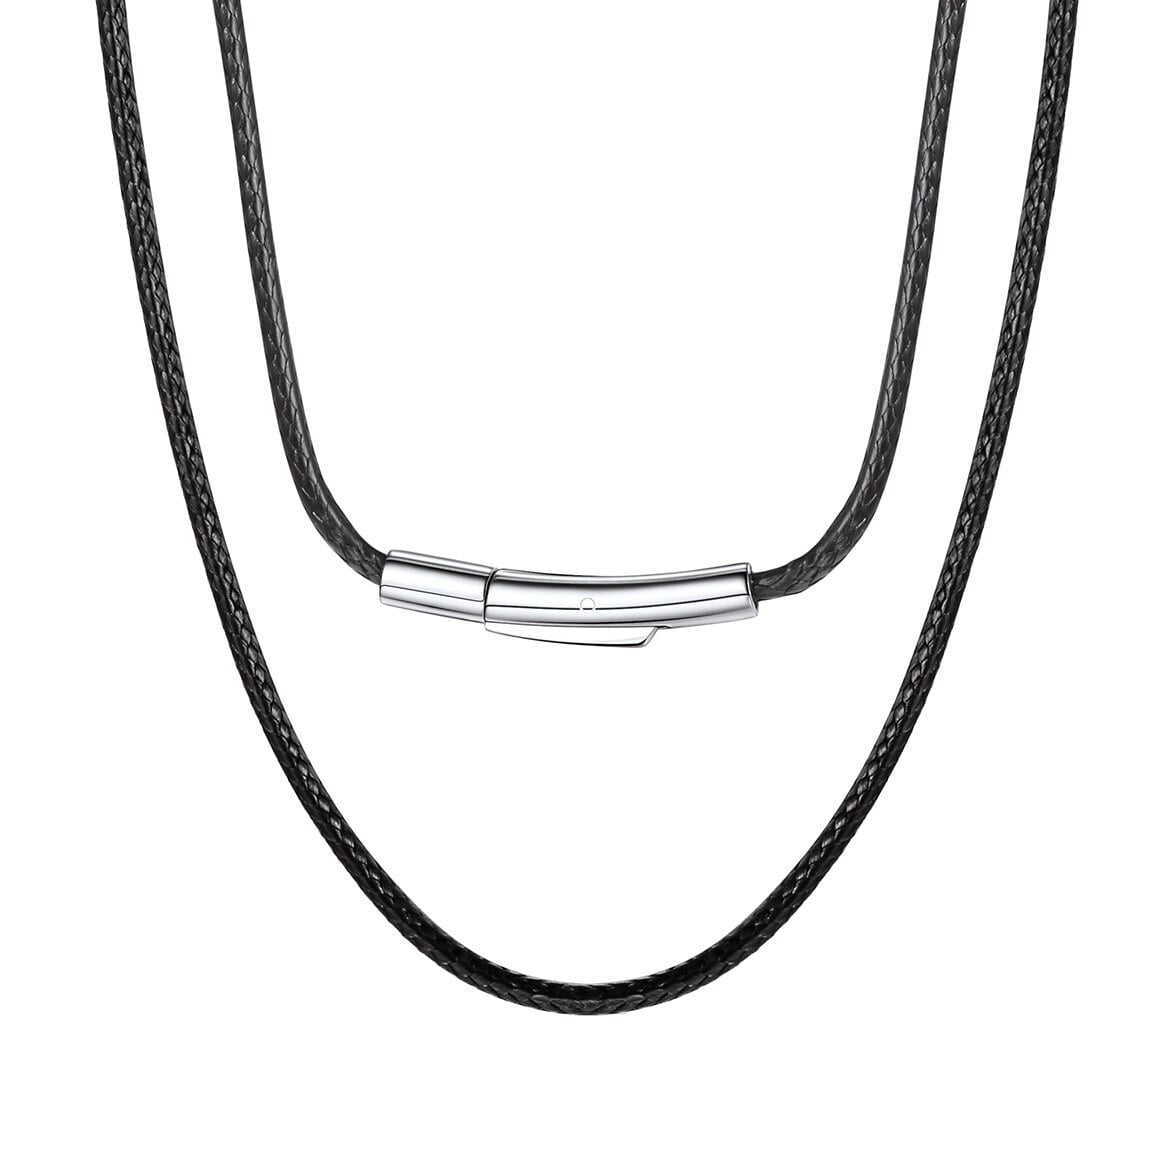 4mm Black Leather Weave Cord & Stainless Steel Clasp Necklace, 18 Inch